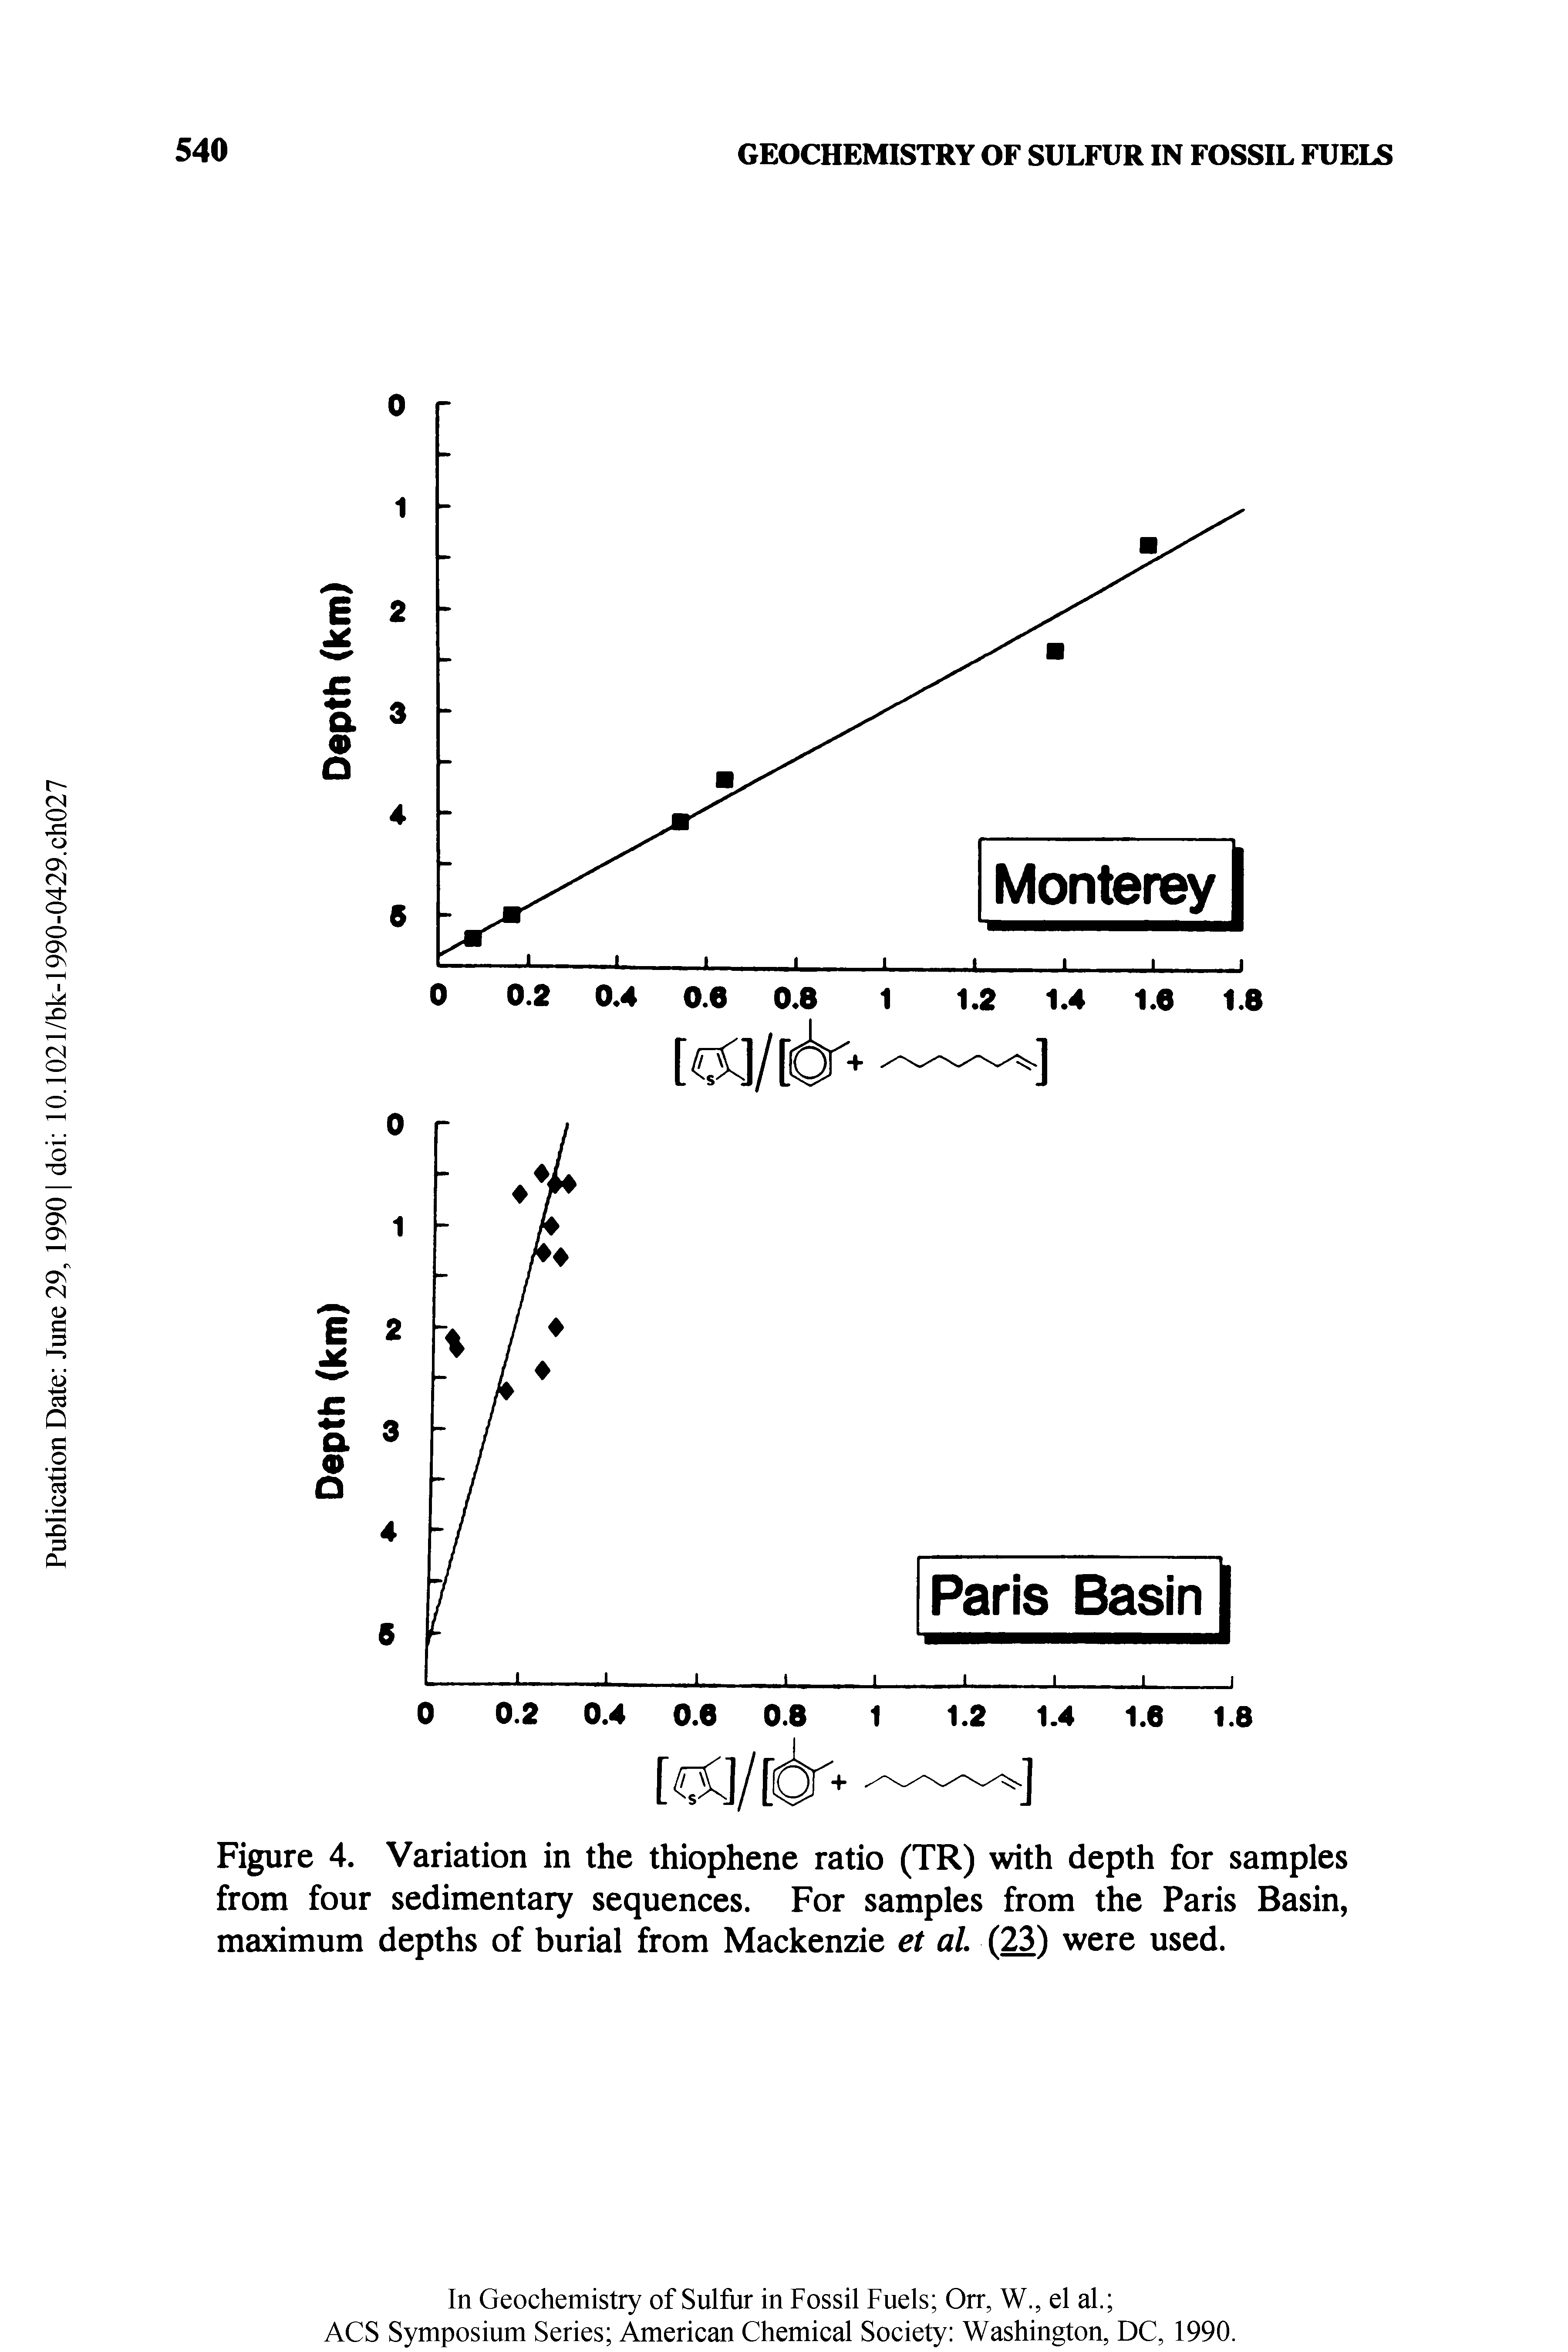 Figure 4. Variation in the thiophene ratio (TR) with depth for samples from four sedimentary sequences. For samples from the Paris Basin, maximum depths of burial from Mackenzie et al (23) were used.